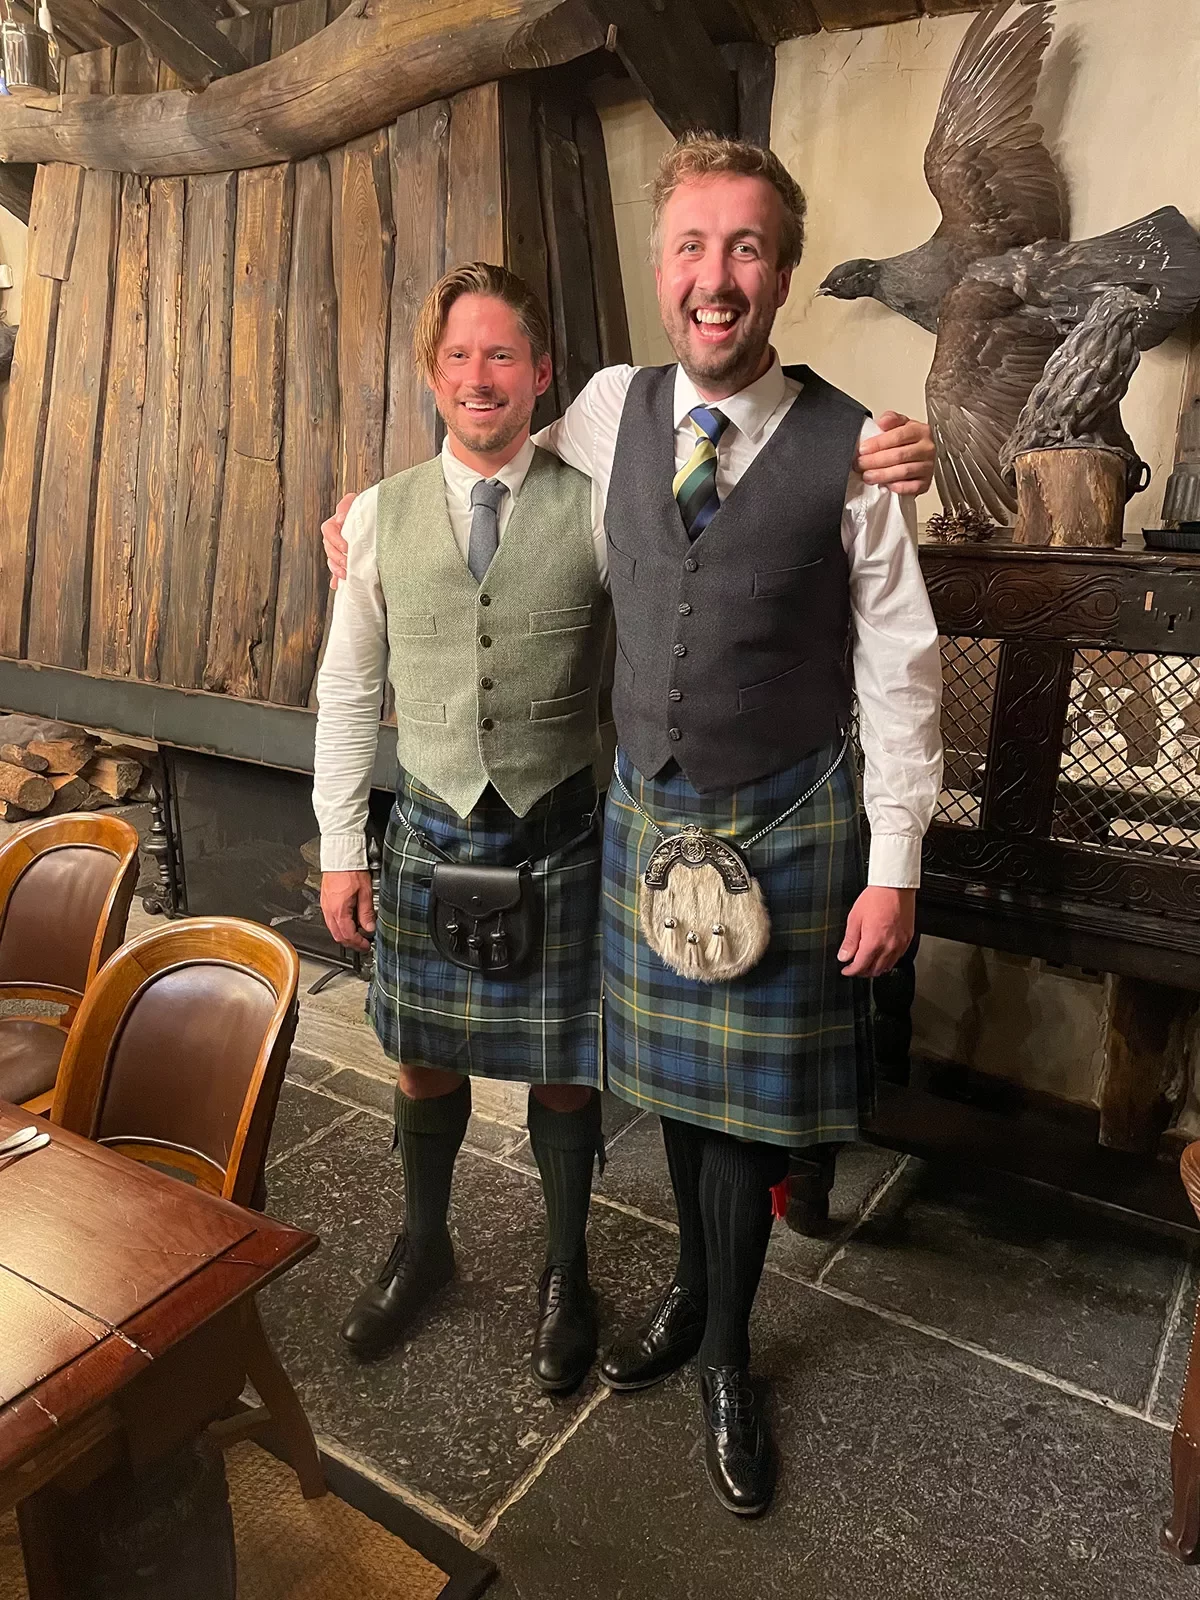 Two Scots in Kilts